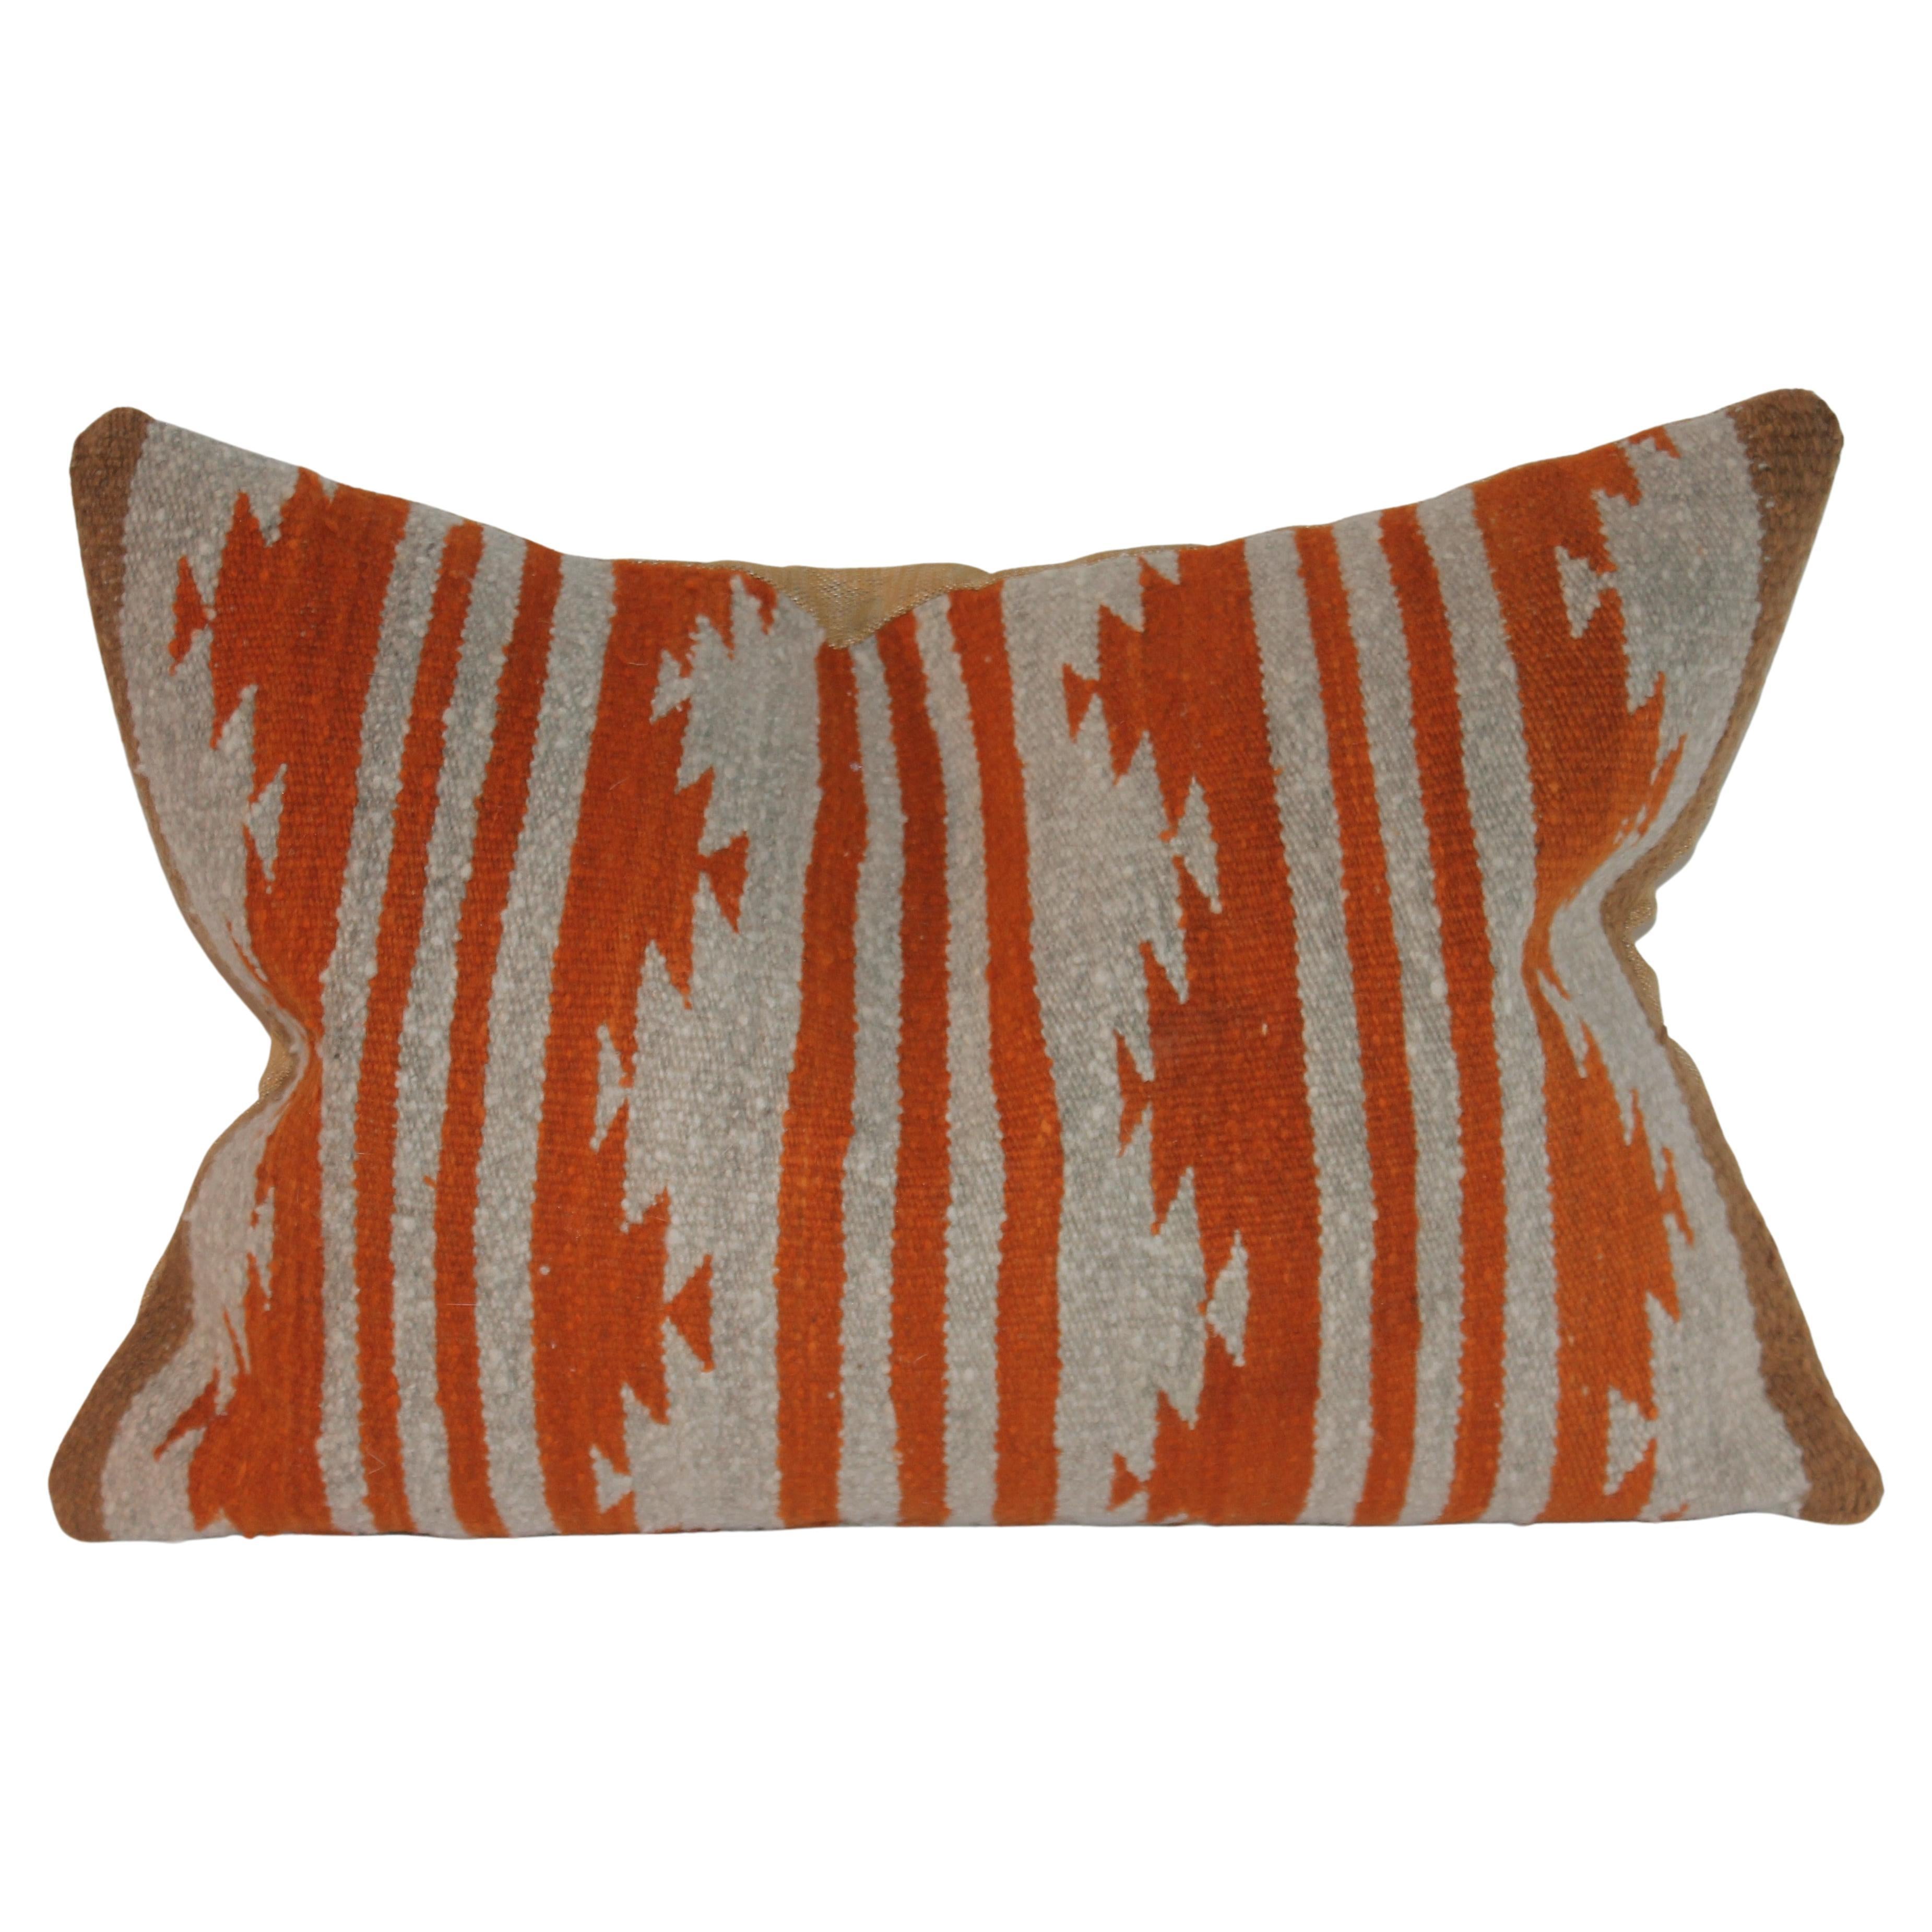 Custom Made Mexican Indian Weaving Pillow For Sale